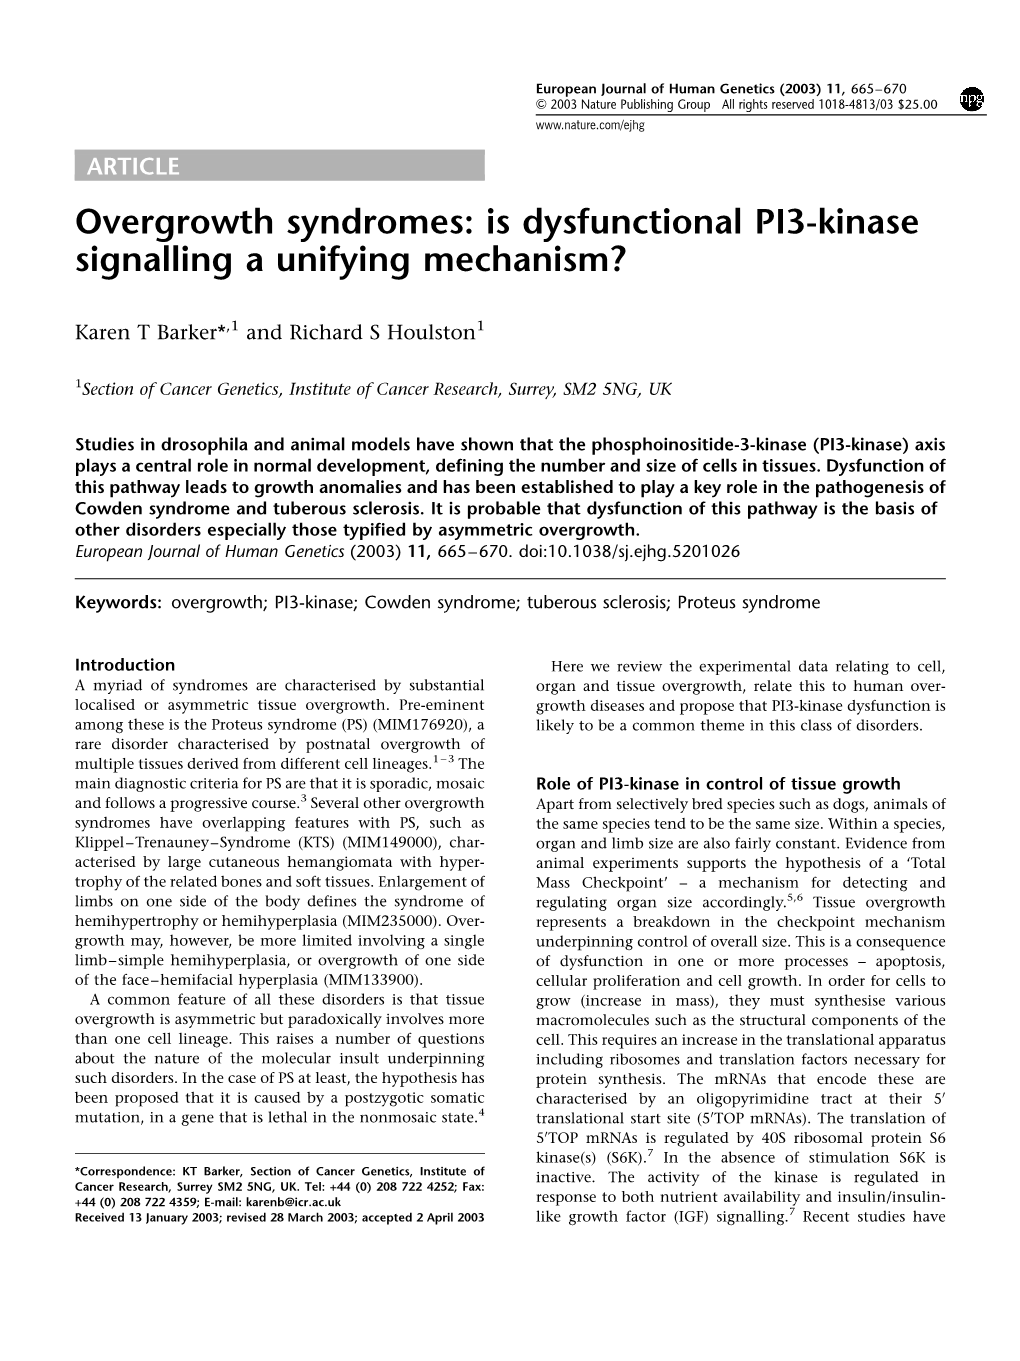 Overgrowth Syndromes: Is Dysfunctional PI3-Kinase Signalling a Unifying Mechanism?